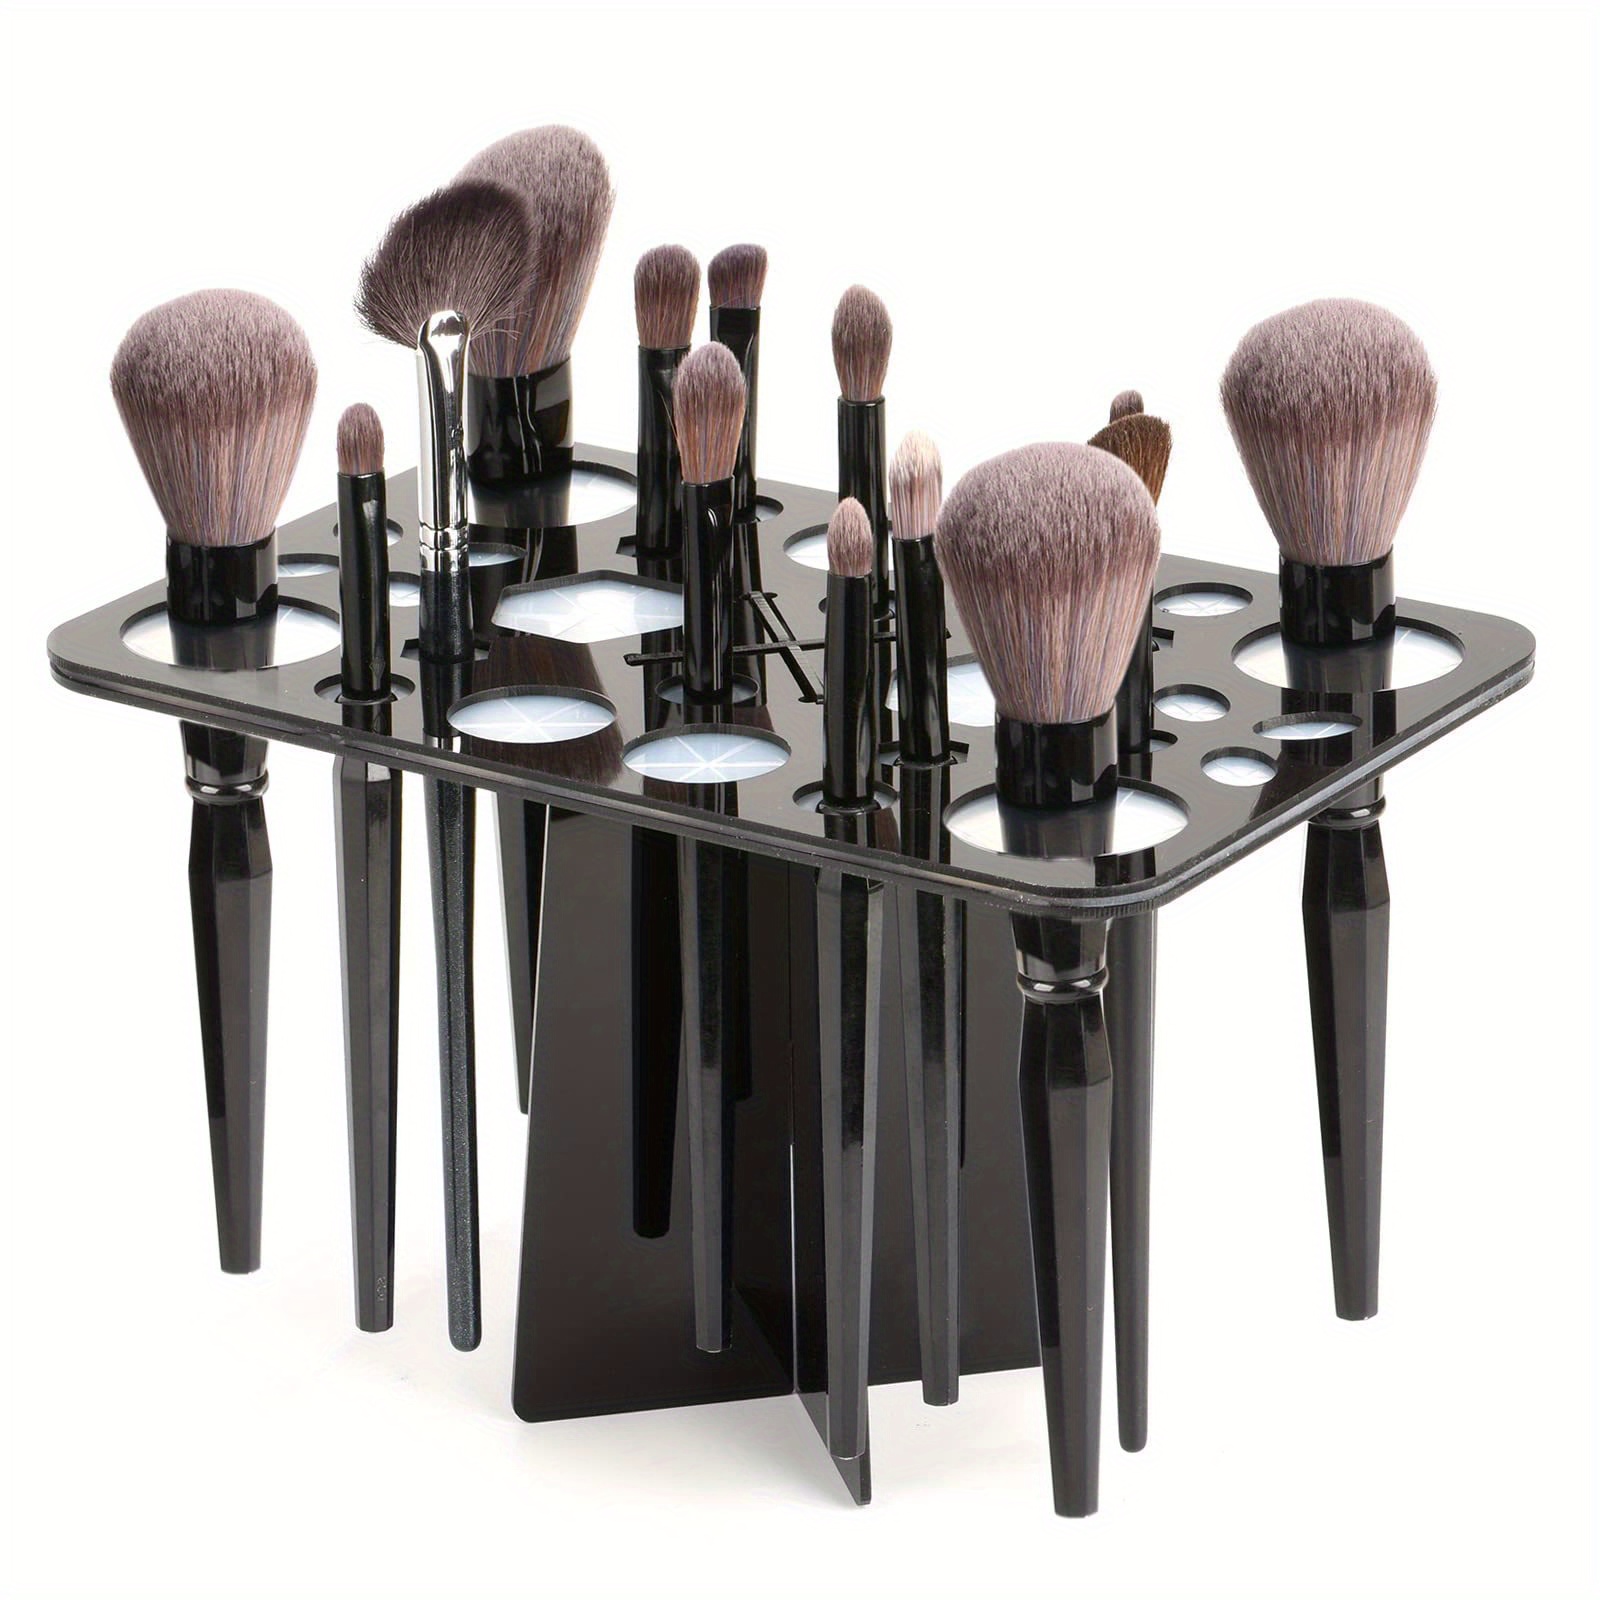 Makeup Brush Dryer Makeup Brush Stand Collapsible Multiple Slot Brush  Holder Stand Tree Tray Support Display For Artist Acrylic - AliExpress